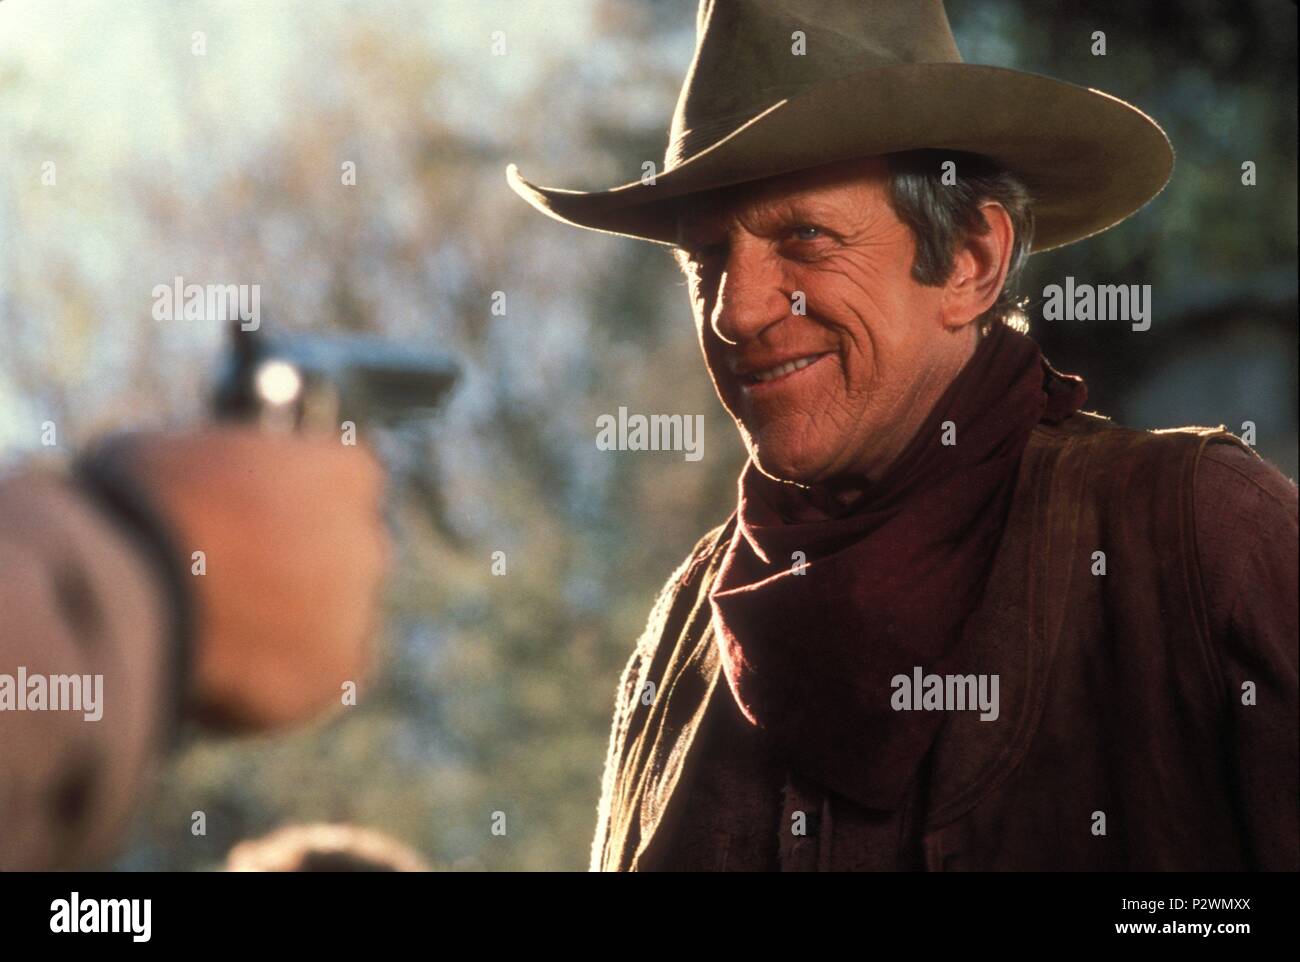 Original Film Title: RED RIVER.  English Title: RED RIVER.  Film Director: RICHARD MICHAELS.  Year: 1988.  Stars: JAMES ARNESS. Credit: MGM/UA TELEVISION / Album Stock Photo